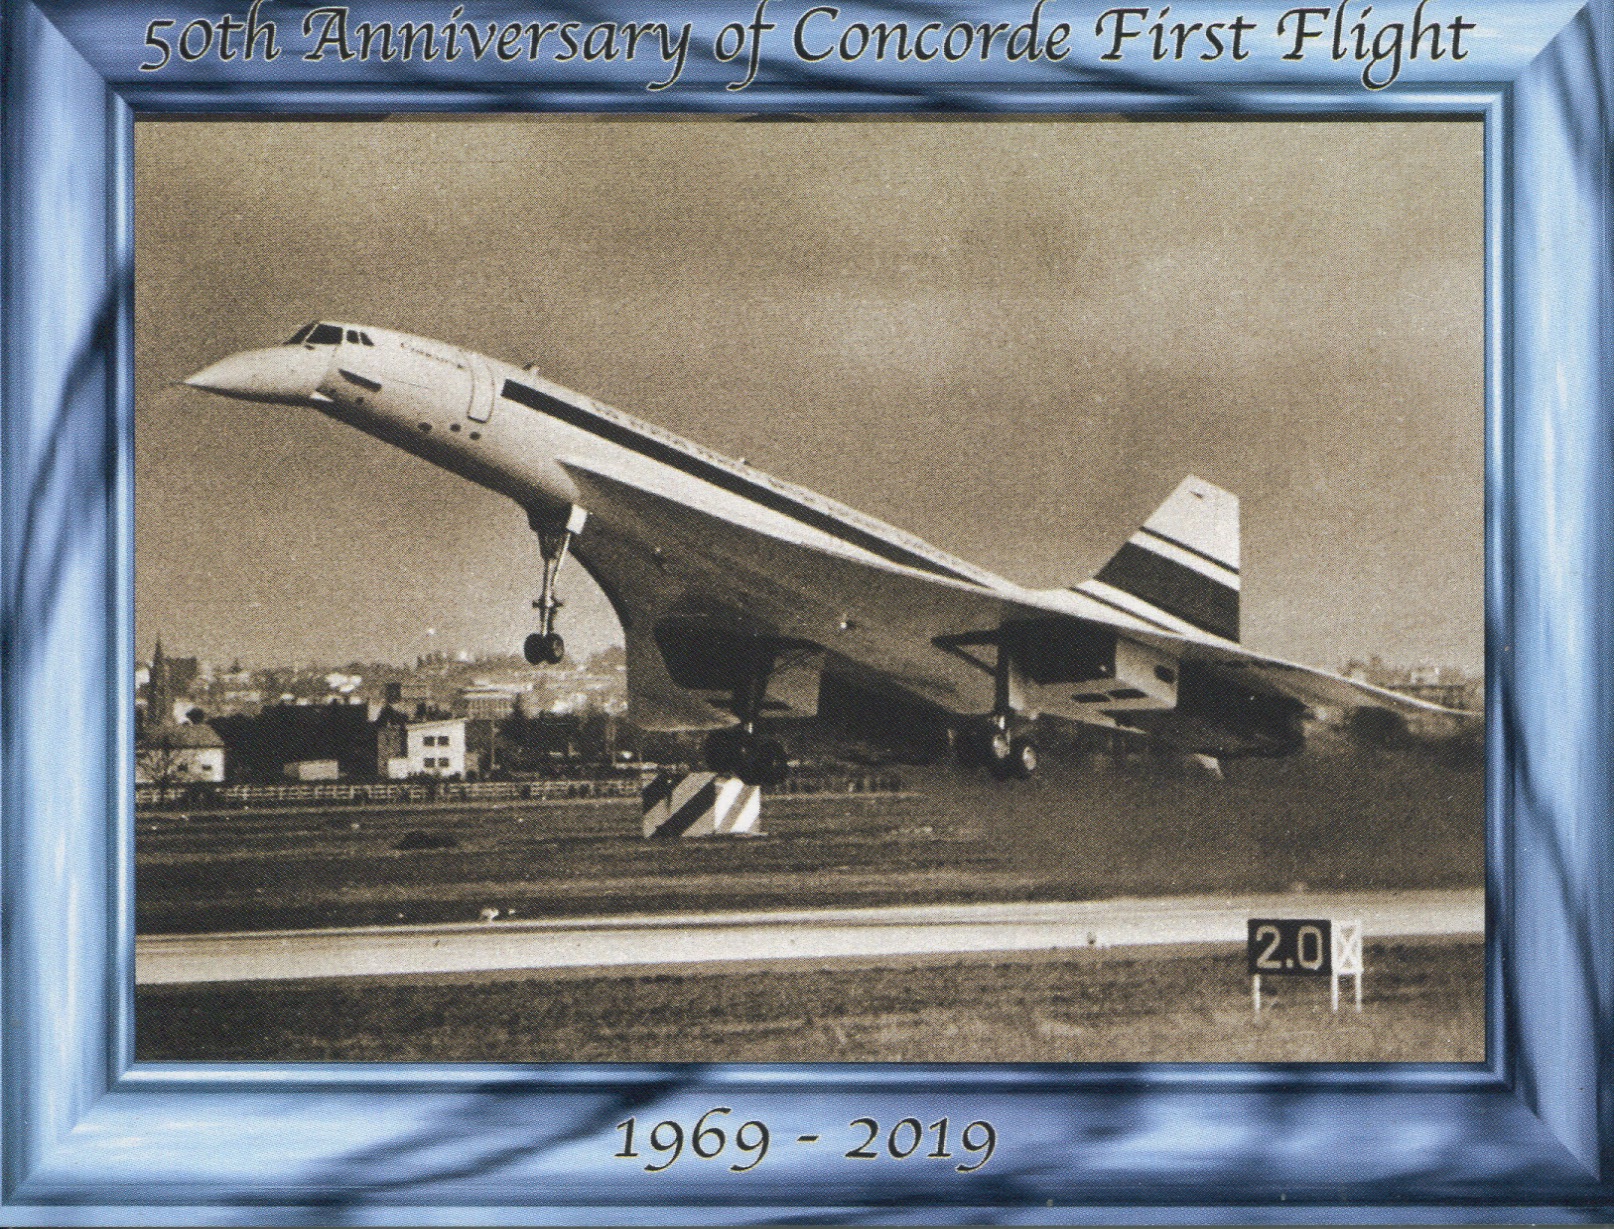 50th Anniversary of Concorde First Flight